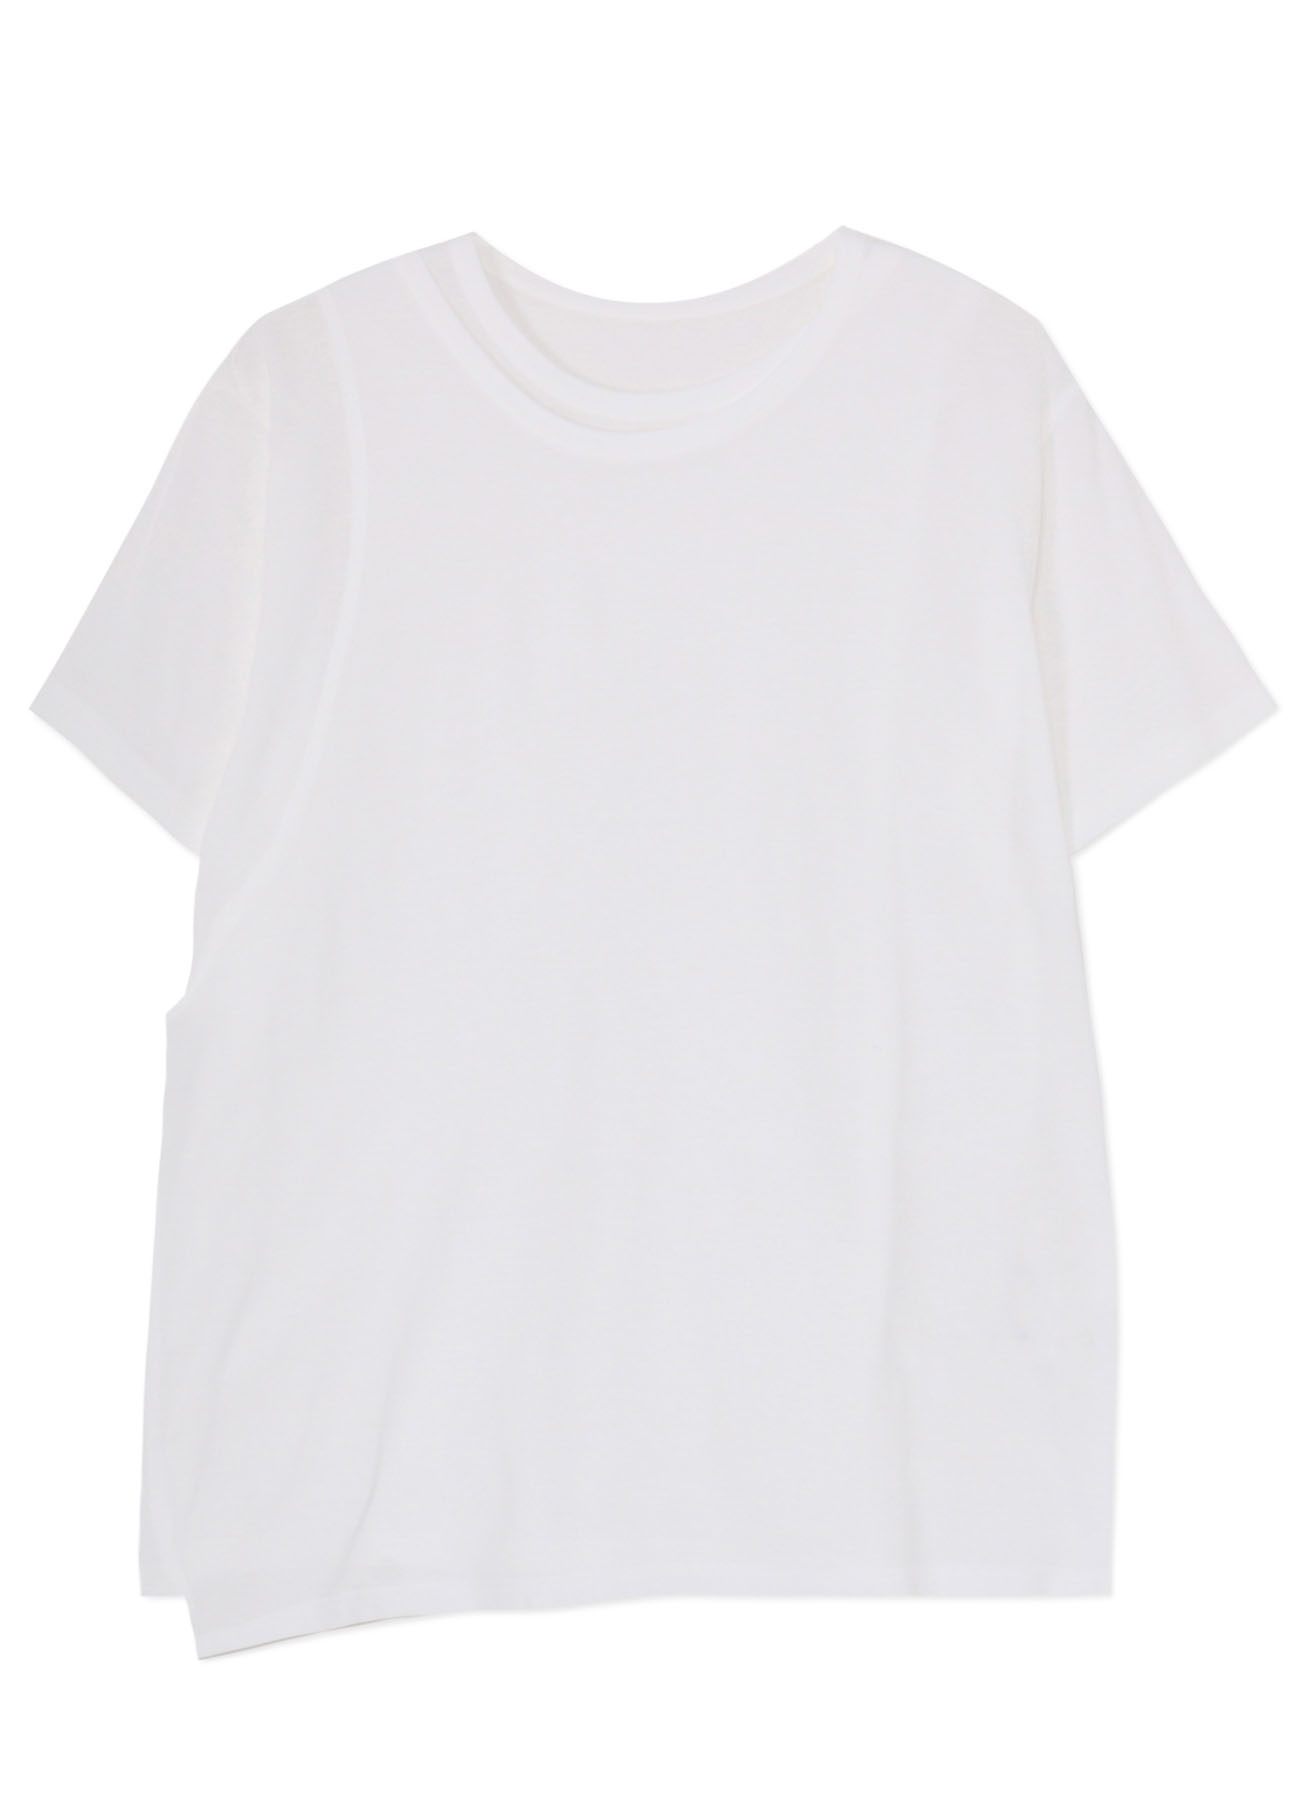 COTTON JERSEY DOUBLE FRONT HALF SLEEVE T